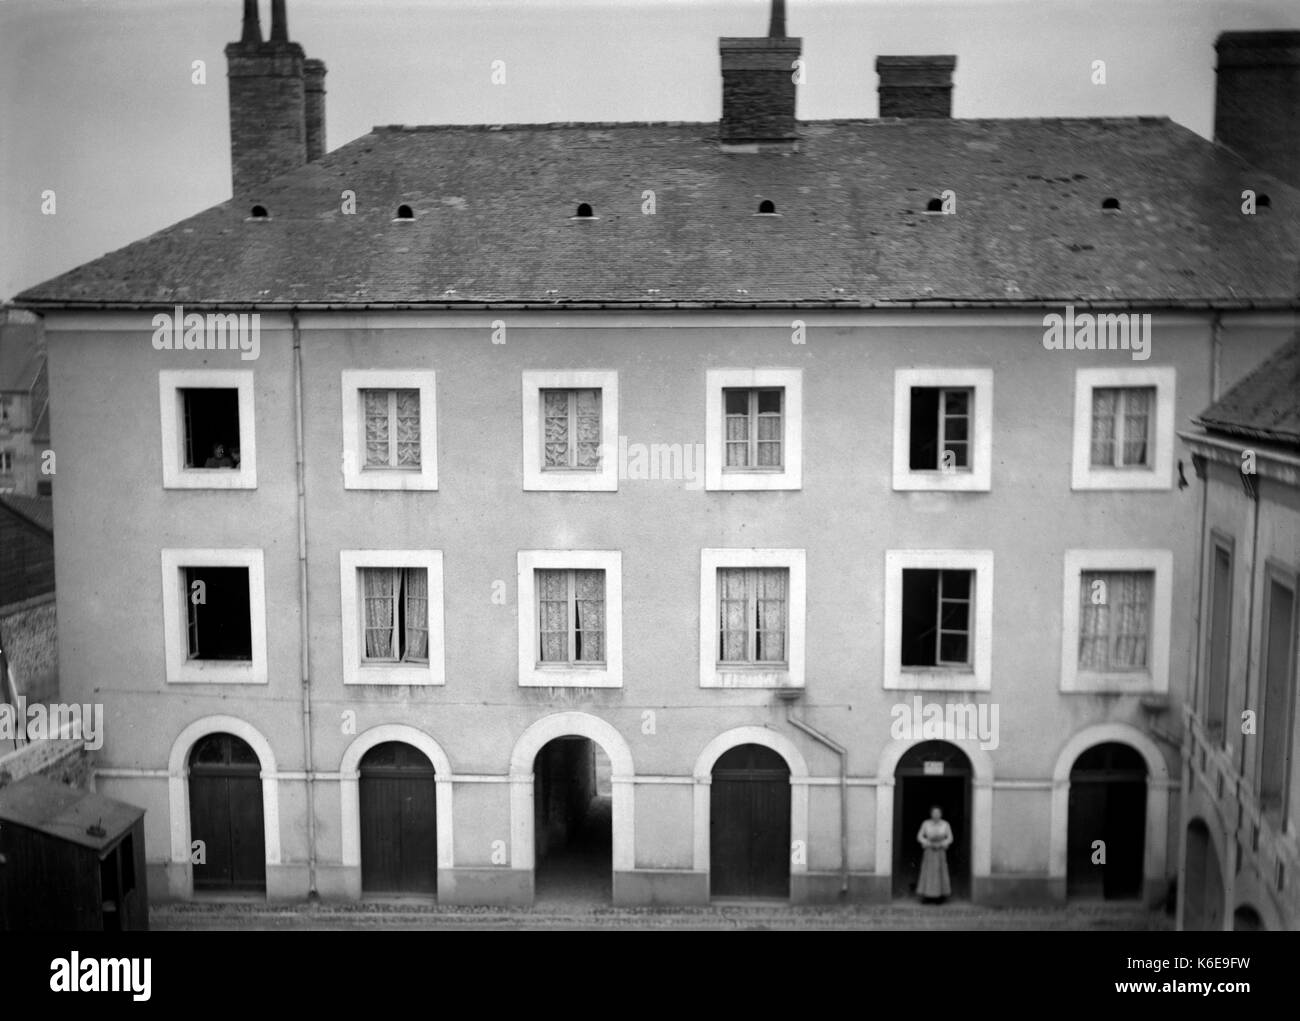 AJAXNETPHOTO. 1891-1910 (APPROX). SAINT-LO REGION, NORMANDY, FRANCE. - LARGE RESIDENTIALPROPERTY WITH A WOMAN STANDING IN AN ARCHED DOORWAY. PHOTOGRAPHER:UNKNOWN © DIGITAL IMAGE COPYRIGHT AJAX VINTAGE PICTURE LIBRARY SOURCE: AJAX VINTAGE PICTURE LIBRARY COLLECTION REF:AVL FRA 1890 10 Stock Photo